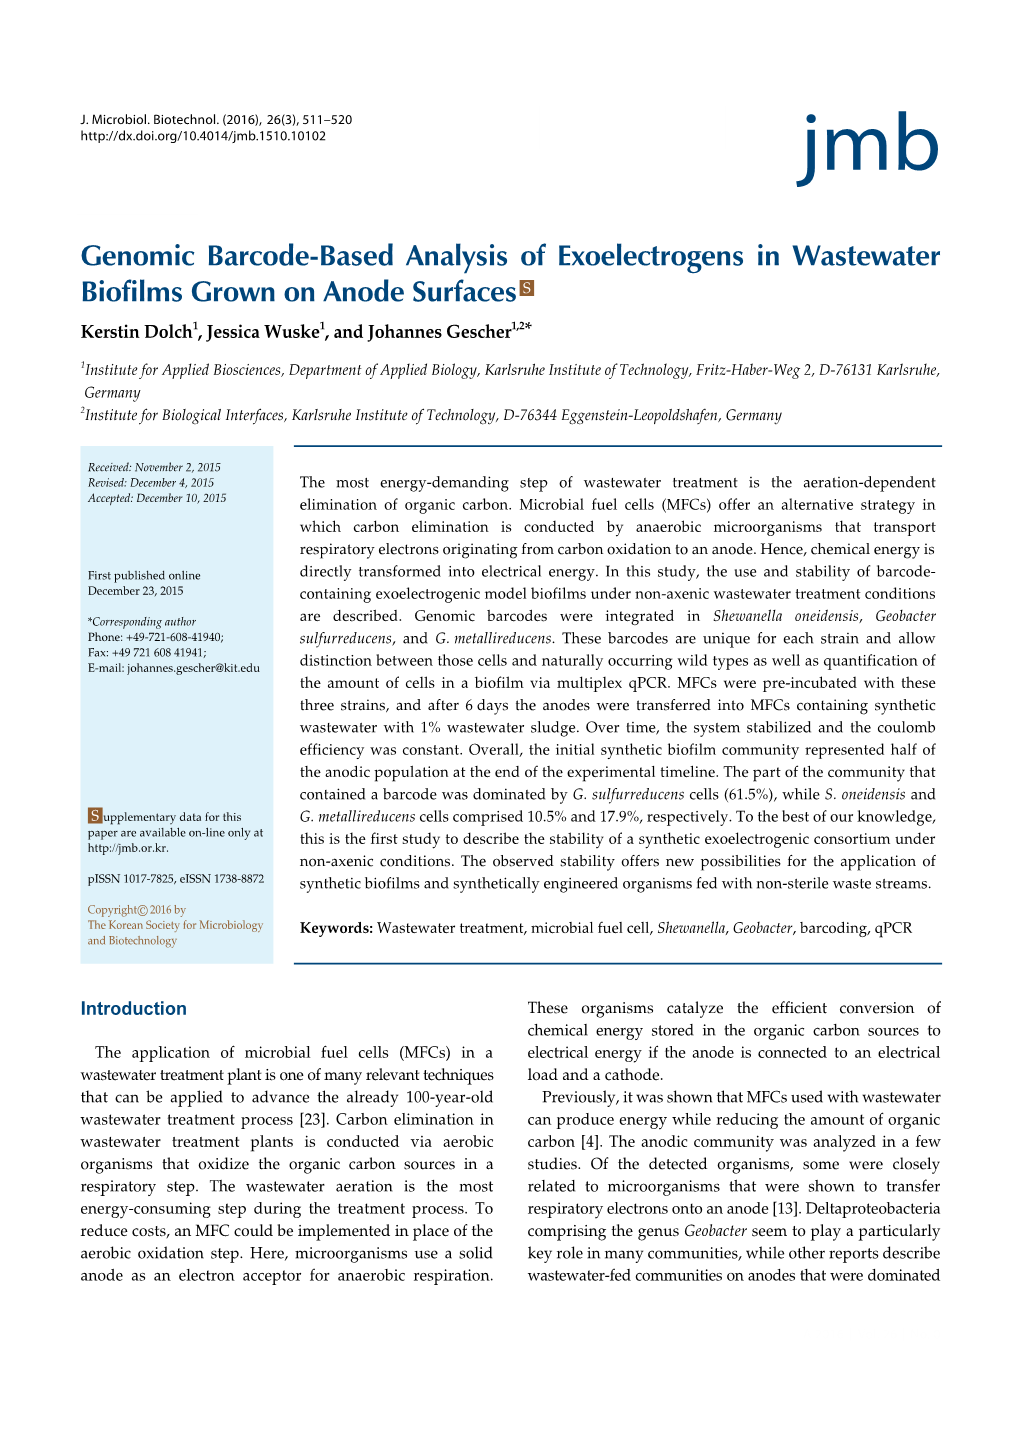 Genomic Barcode-Based Analysis of Exoelectrogens in Wastewater Biofilms Grown on Anode Surfaces S Kerstin Dolch1, Jessica Wuske1, and Johannes Gescher1,2*